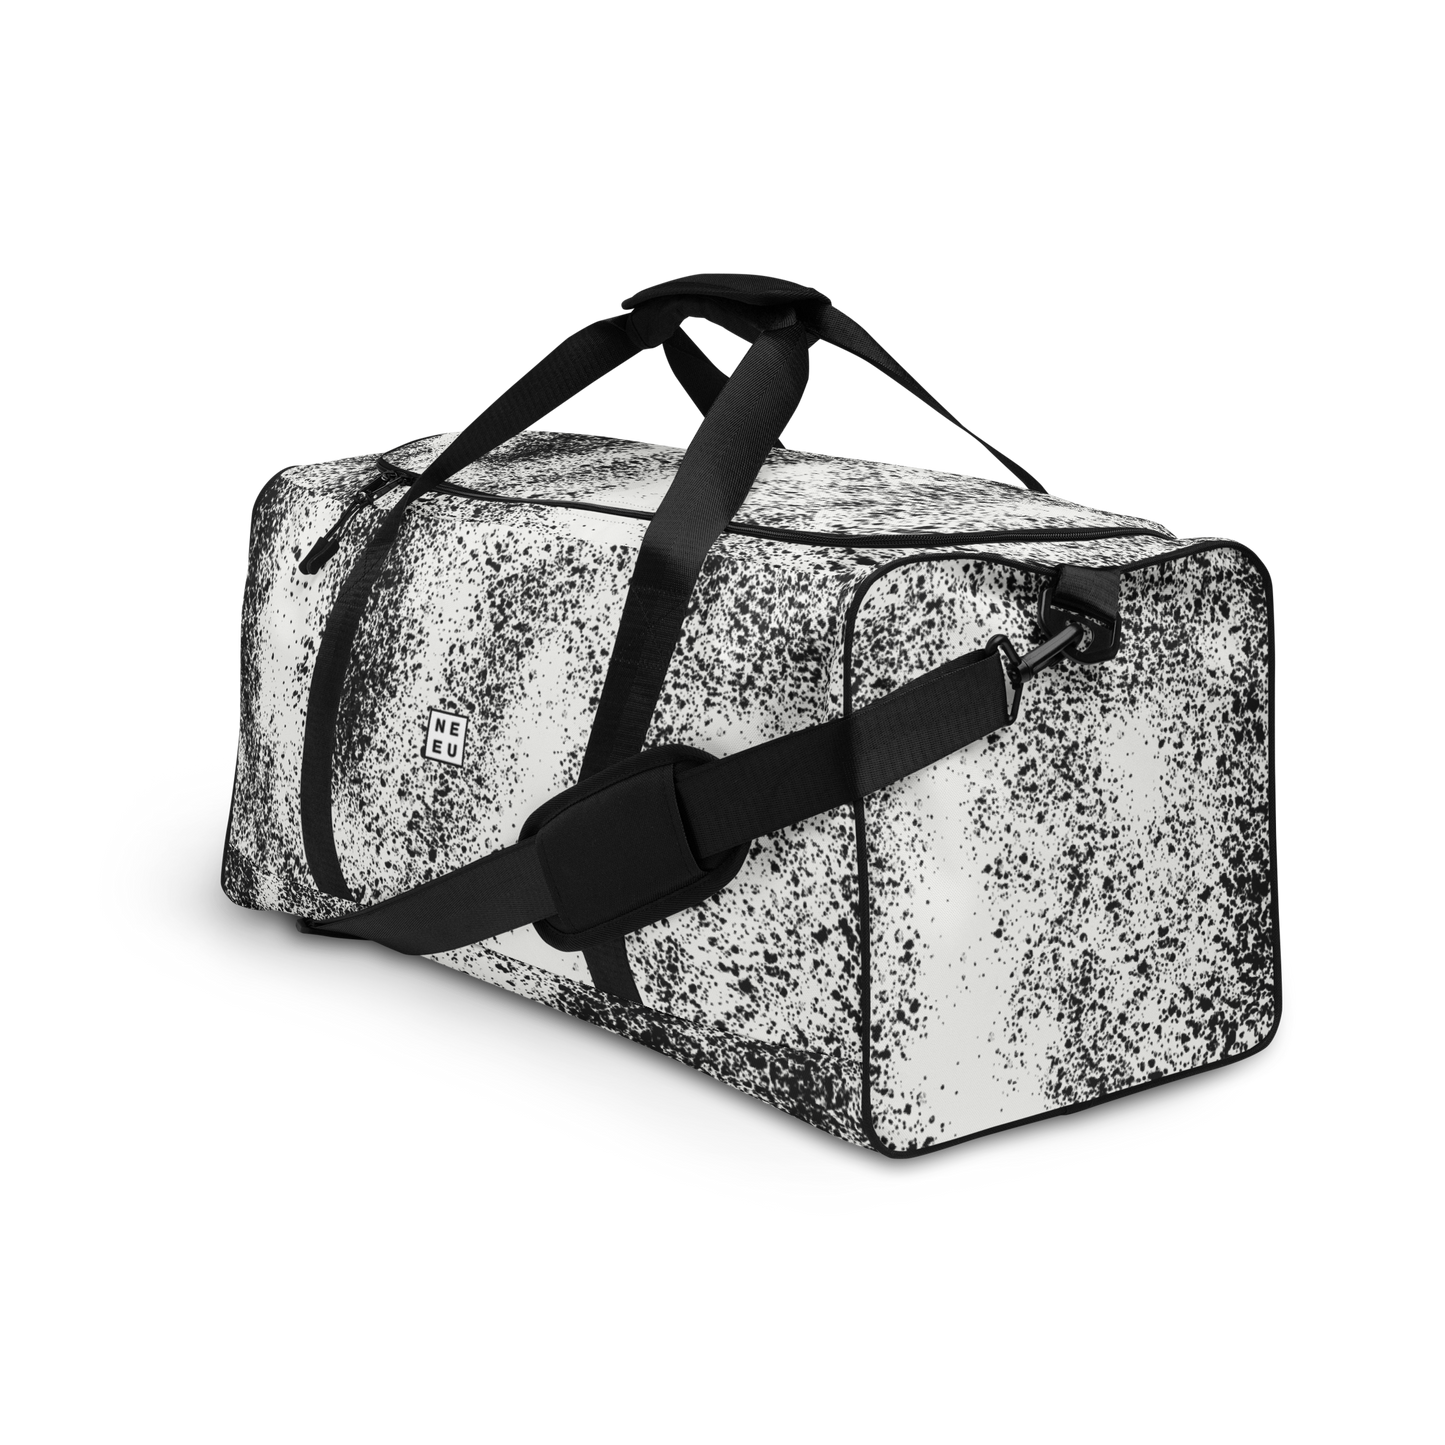 New City Adventure duffle bag in black and white speckle pattern 3/4 view with strap